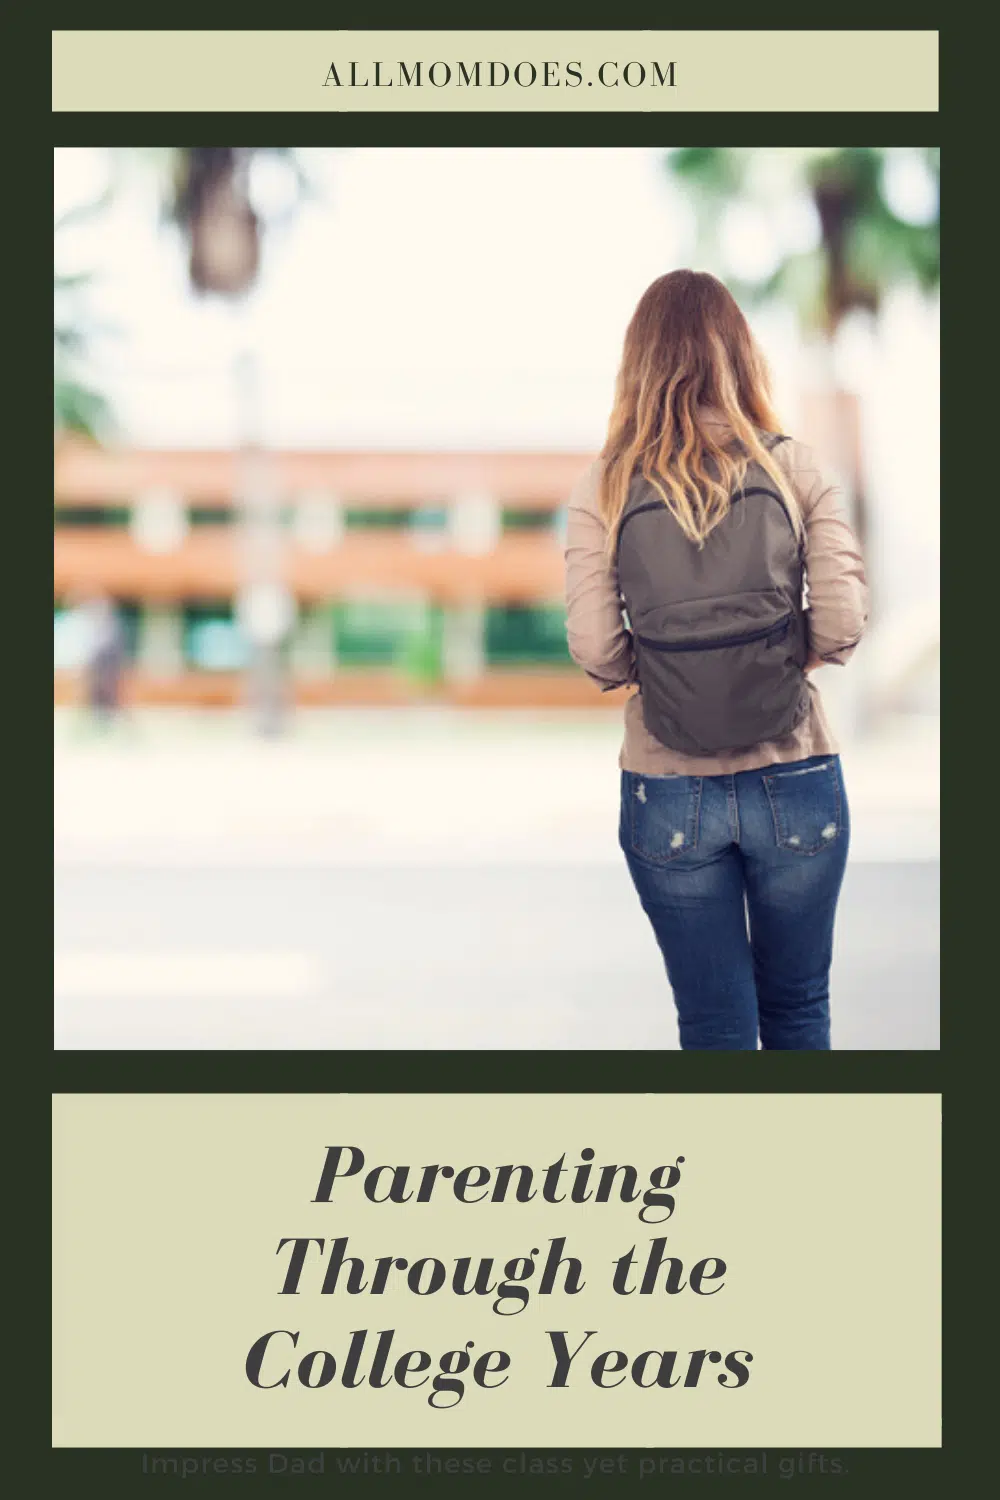 Parenting tips when your kids go to college. Letting go of your older teenager.